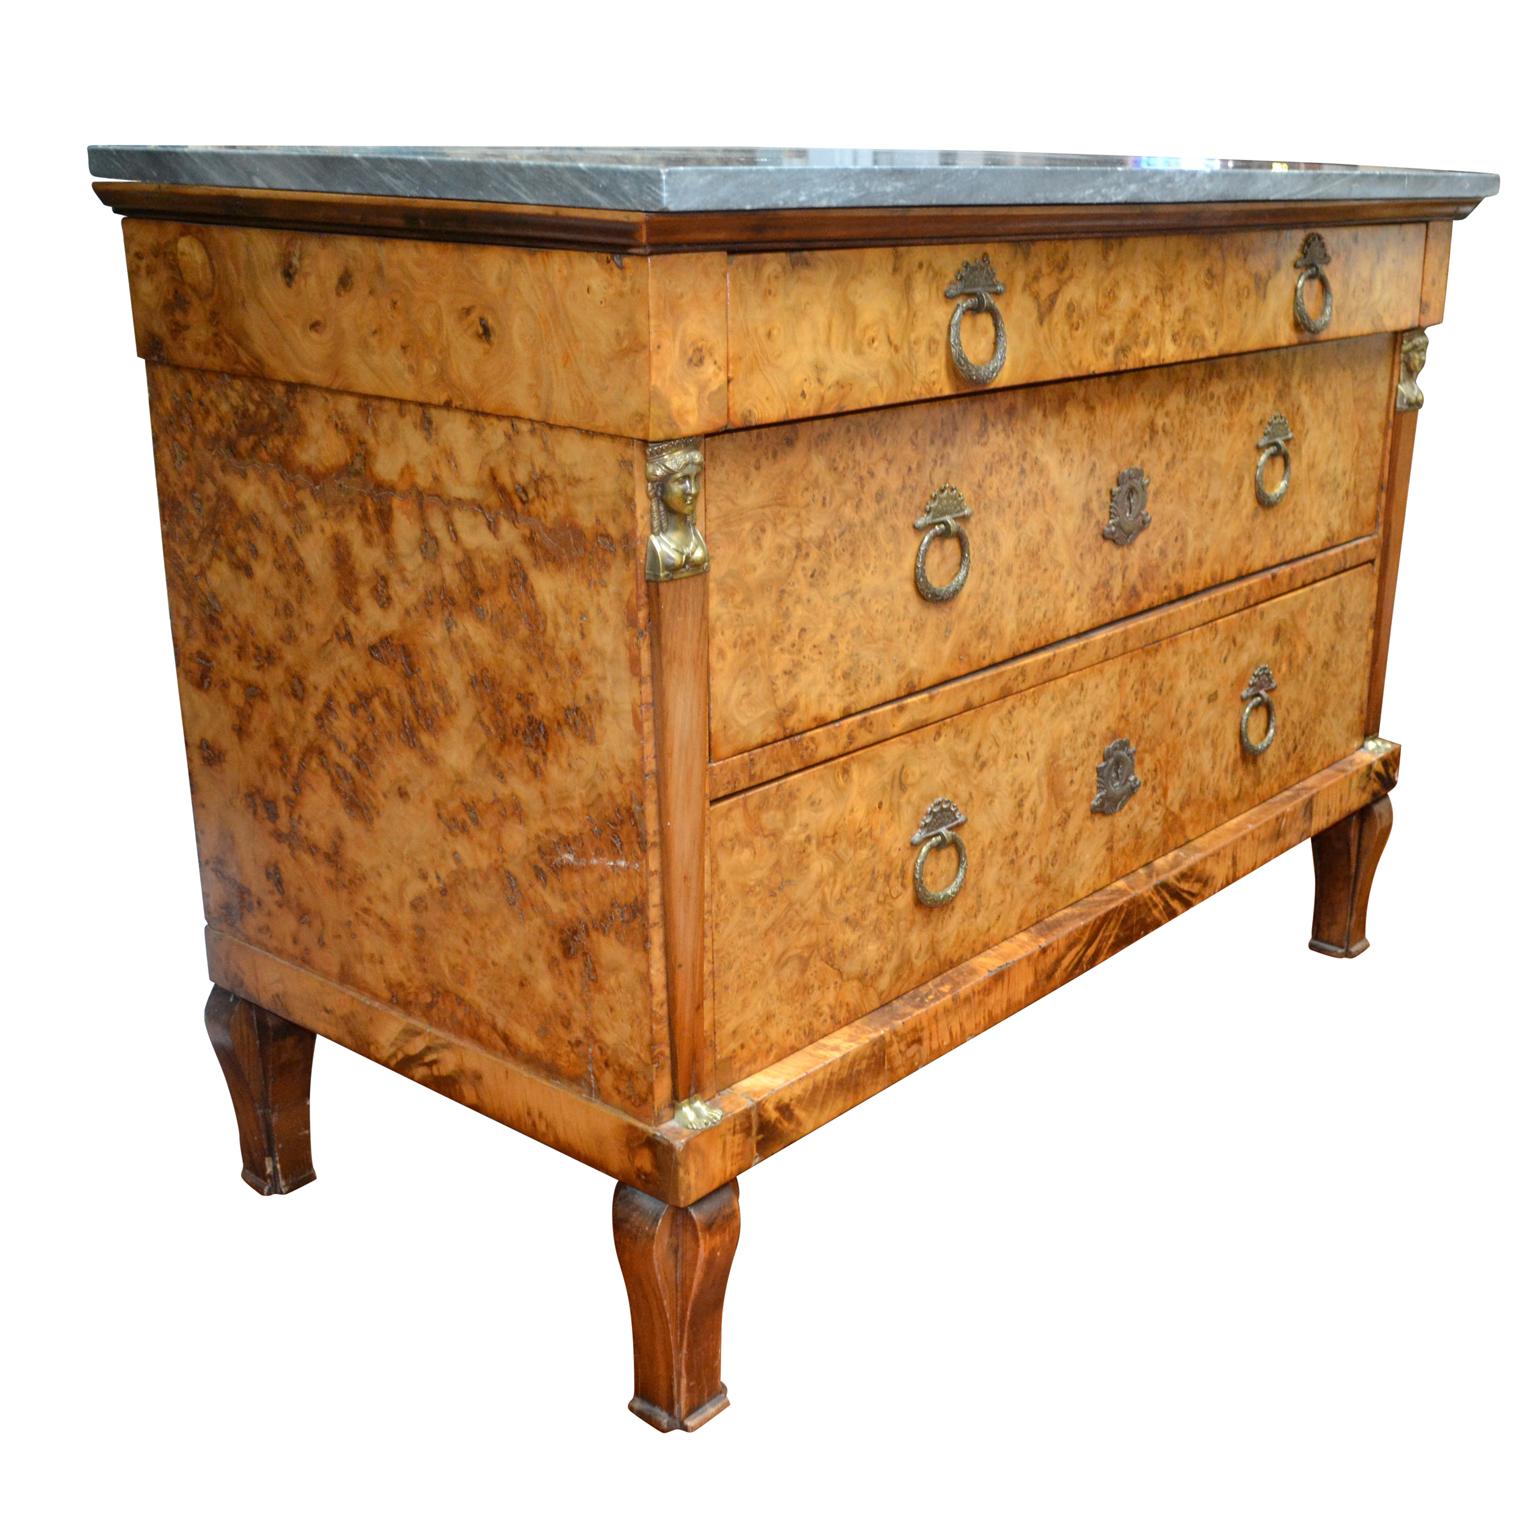 19th Century Swedish Empire Marble Topped Drawer Chest Commode In Good Condition For Sale In Vancouver, British Columbia